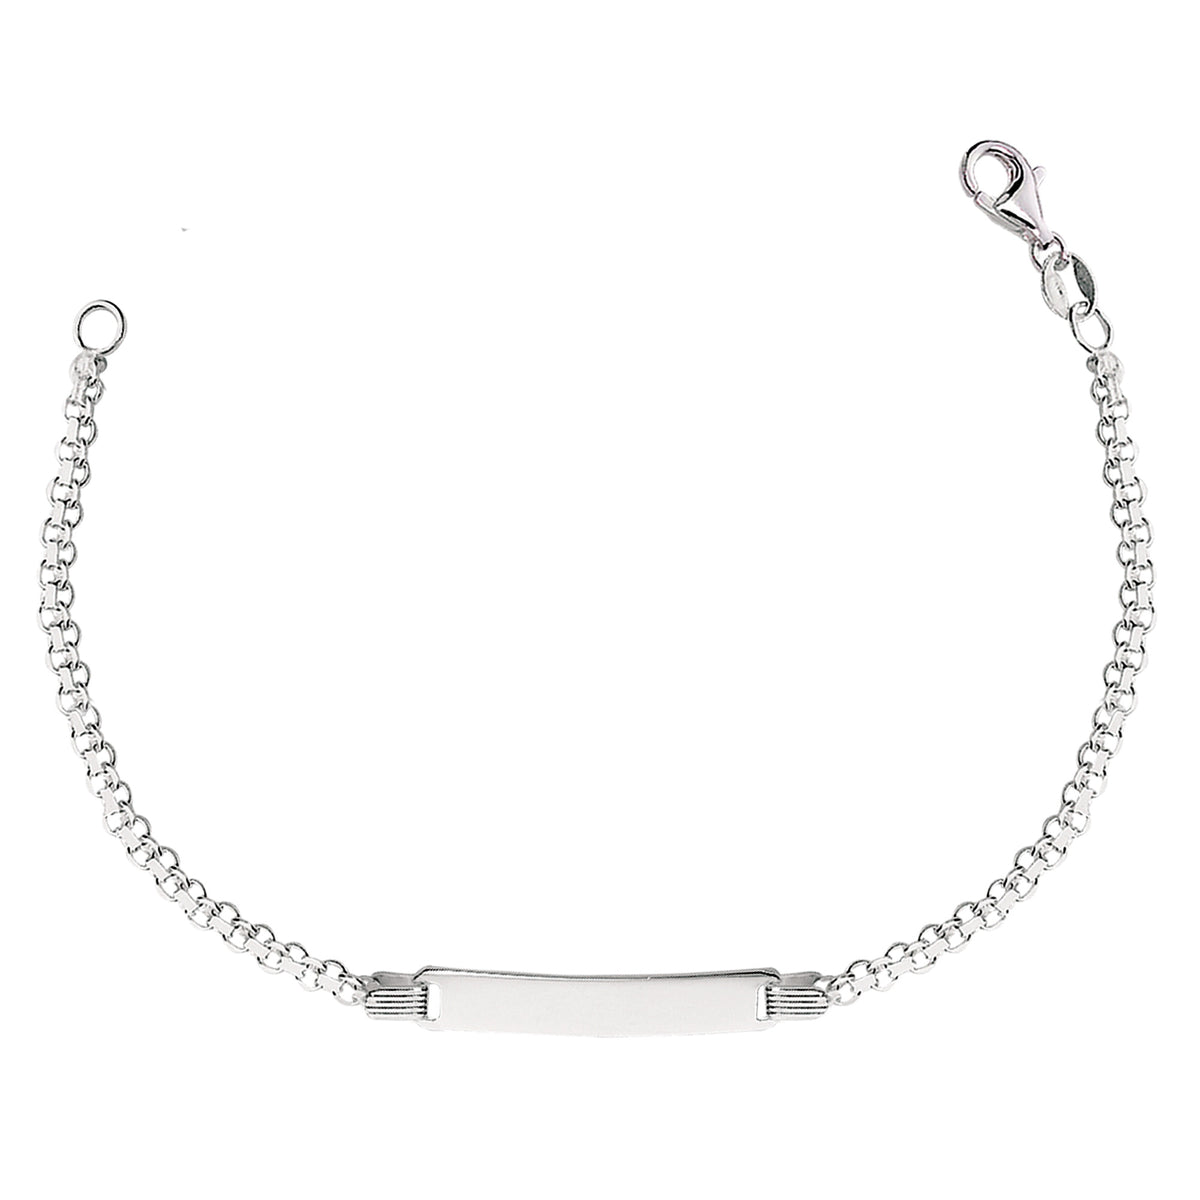 Bismark Chain Baby Id Bracelet In Sterling Silver - 6 Inches - JewelryAffairs
 - 1